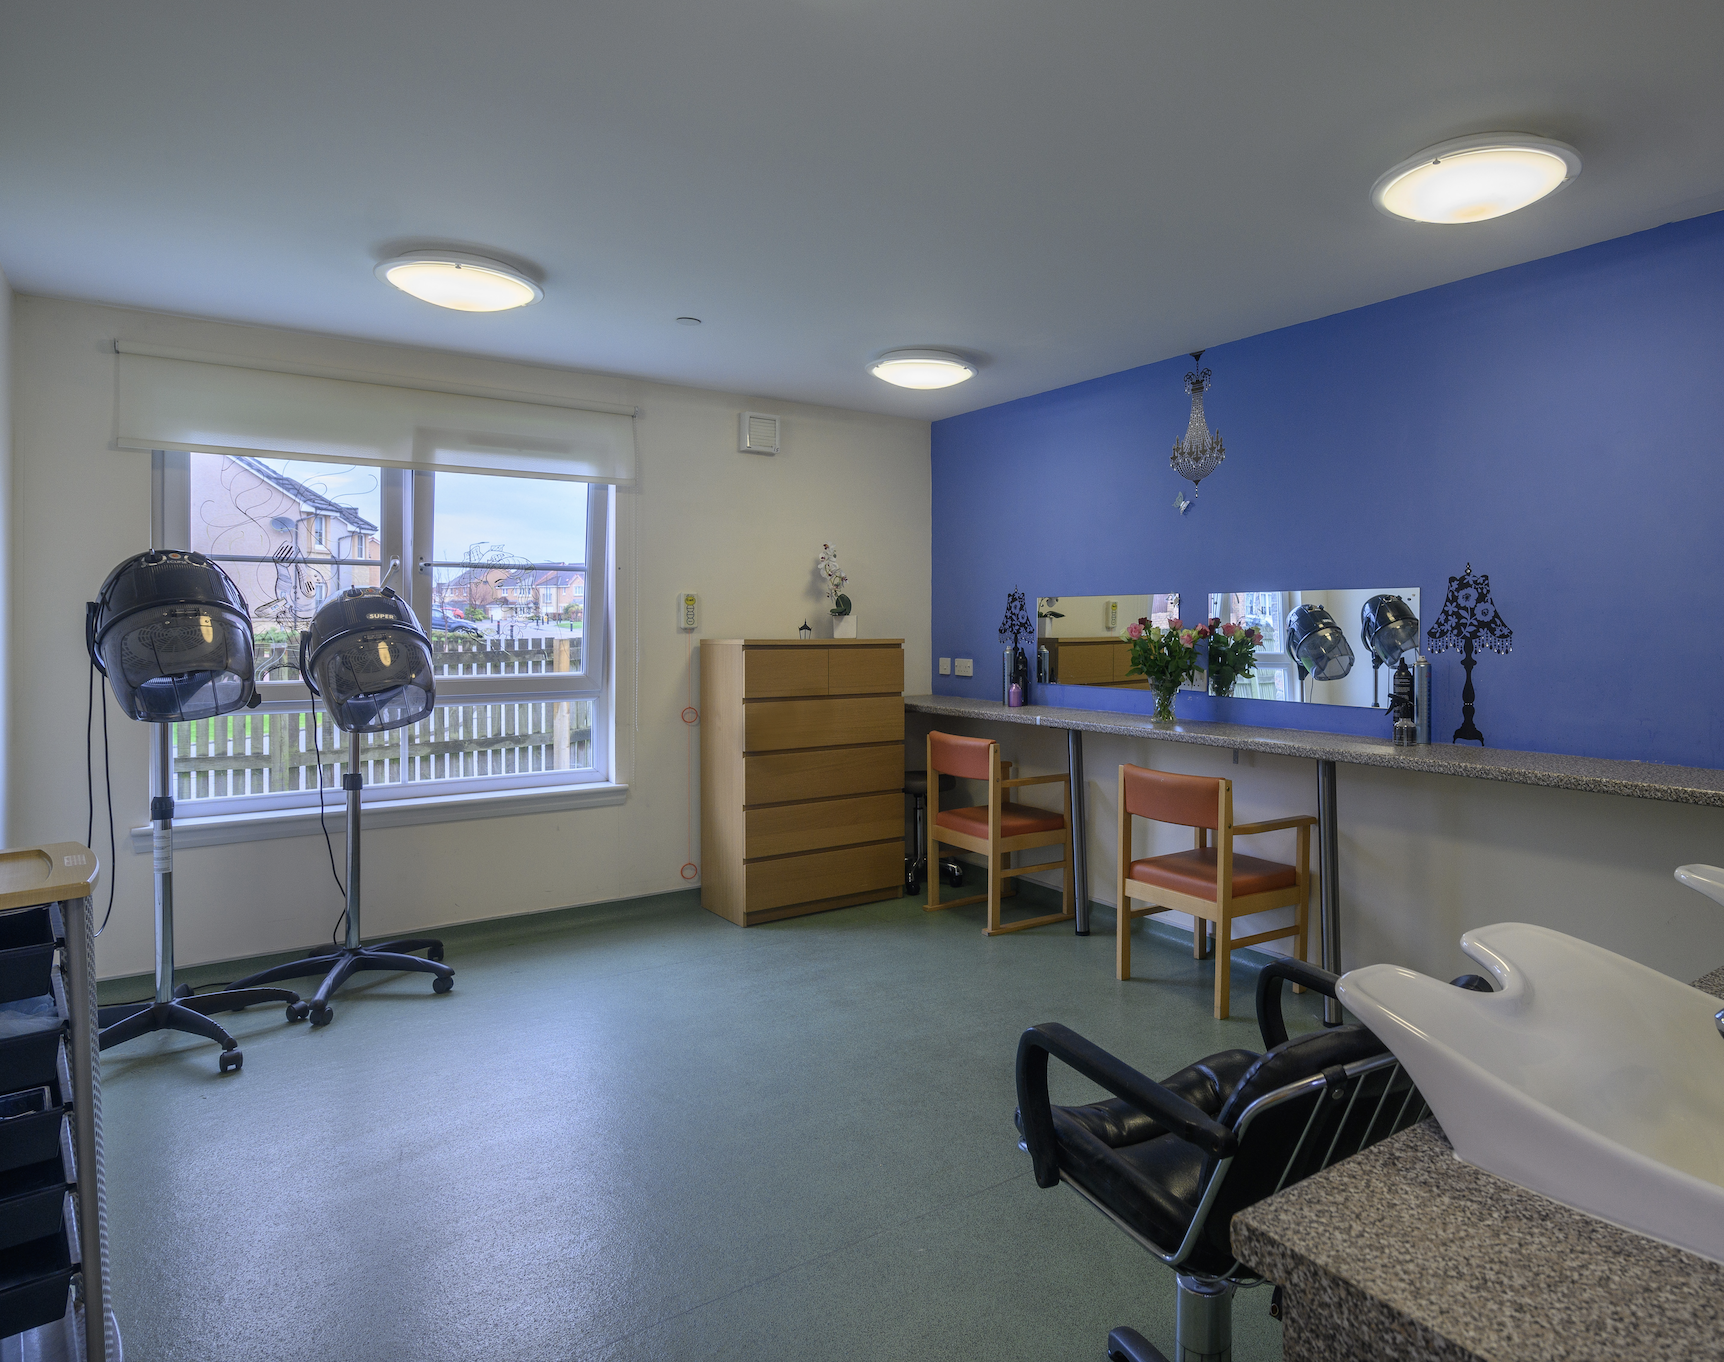 Salon of Caledonian Court Care Home in Falkirk, Scotland